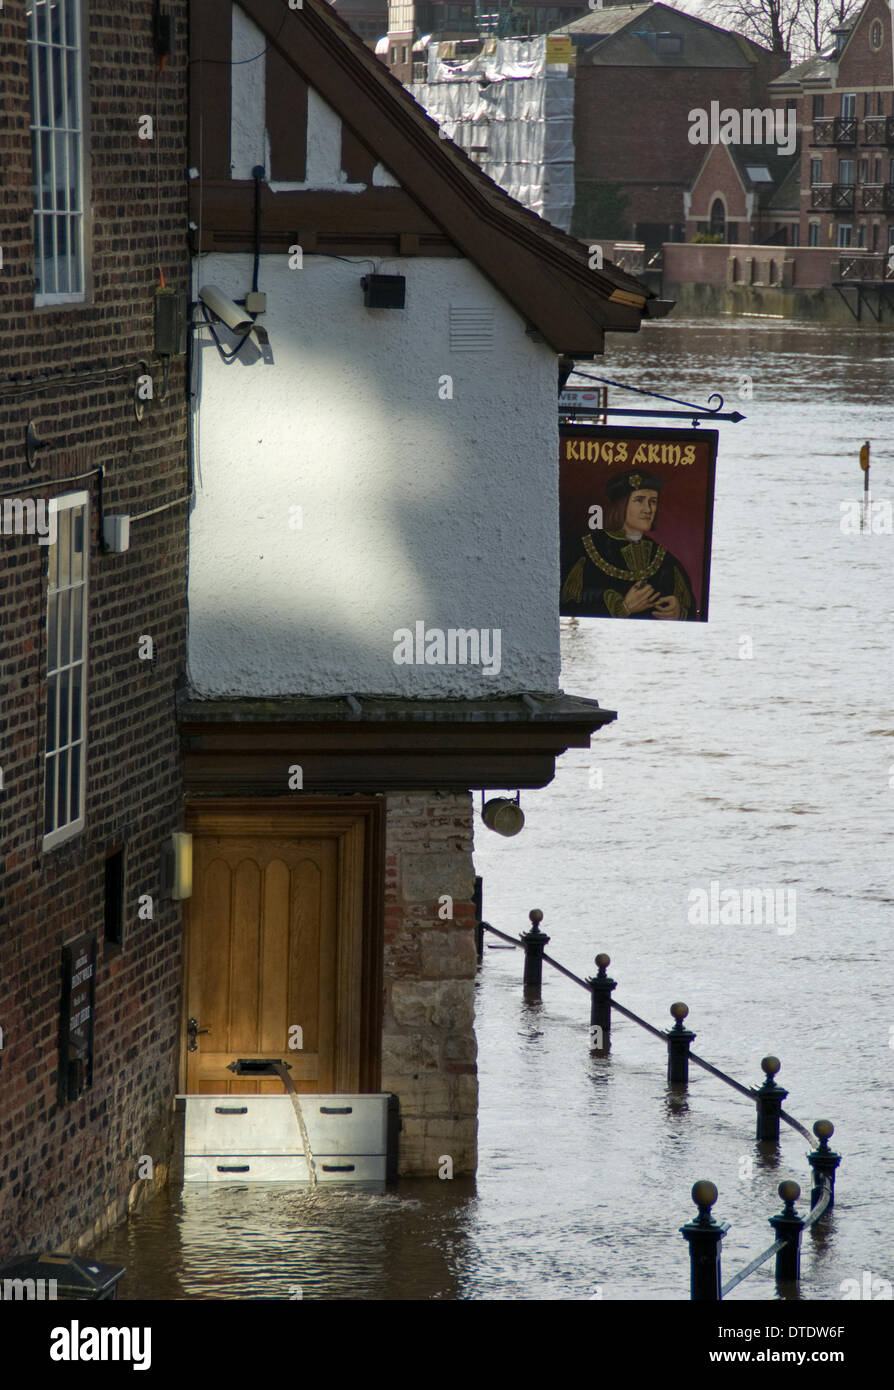 York, UK. 16th February 2014. The Kings Arms public House on King's Staith in York flooded by the river Ouse on the 16th of February. York is regularly flooded by the River Ouse. Flood defences and stategies are well rehearsed in the city, as can be seen by the barriers and the hose pipe poking through the letter box pumping water out. Credit:  CHRIS BOSWORTH/Alamy Live News Stock Photo